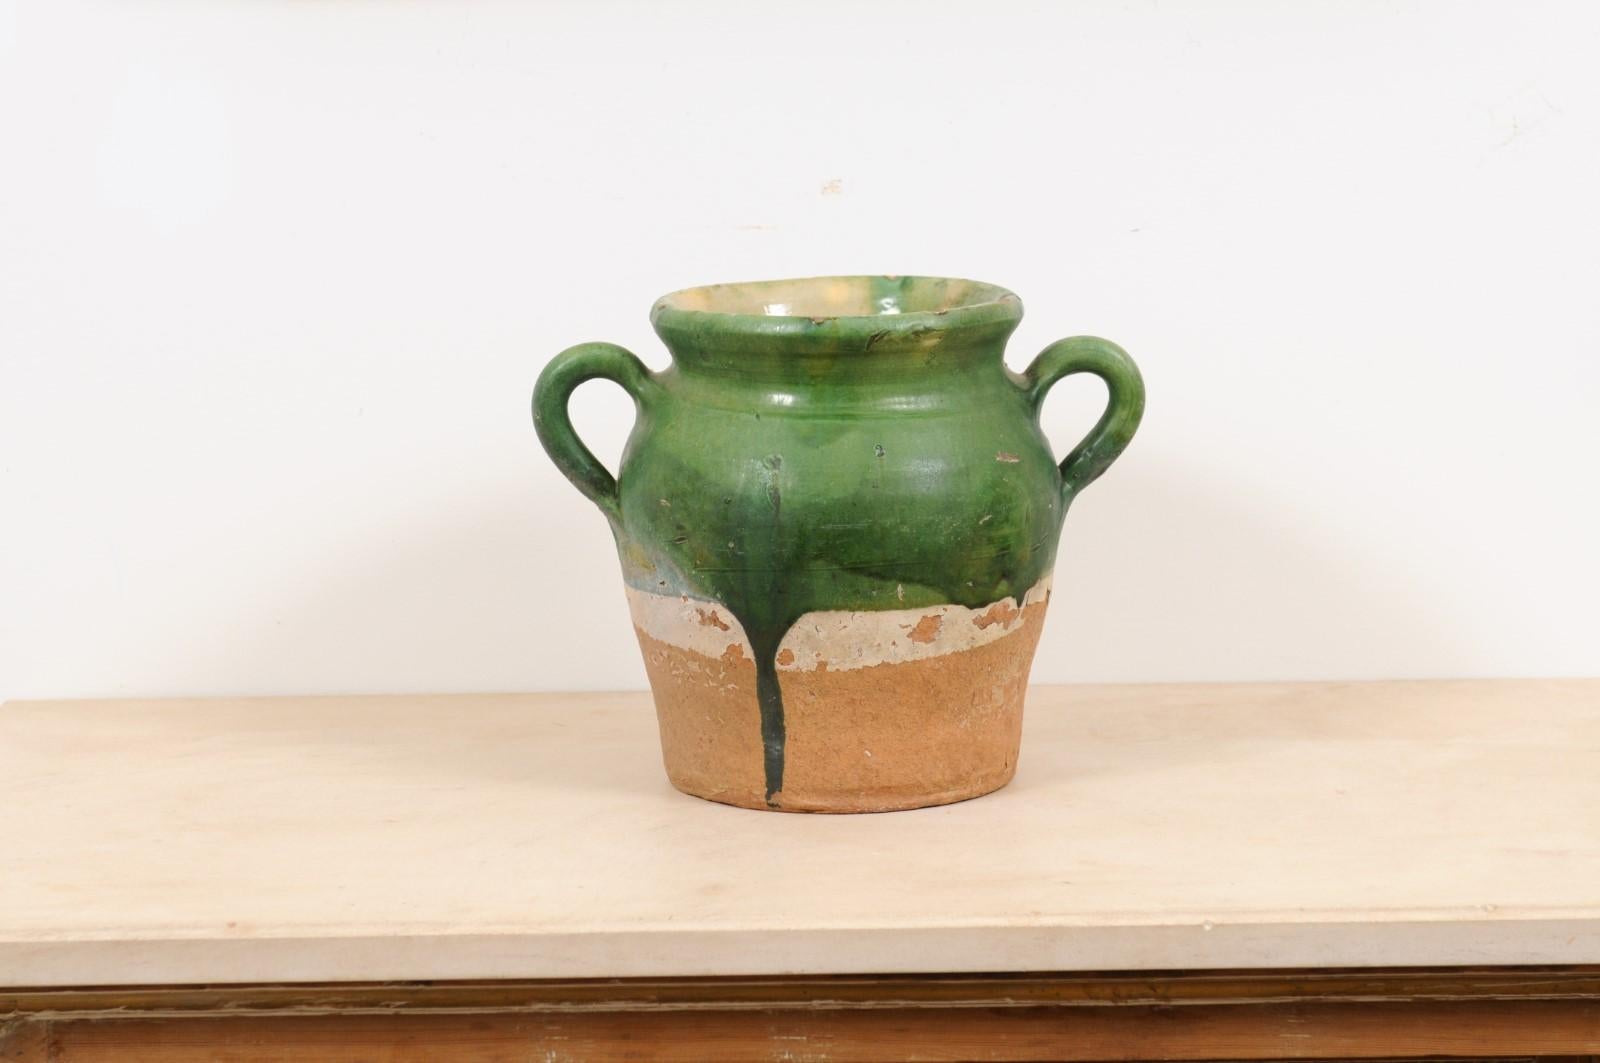 A French green glazed pottery confit pot from the mid-19th century with two handles and unglazed base. Created in France during the early years of Napoleon III's reign, this confit pot features a green glaze in its upper section dripping on the